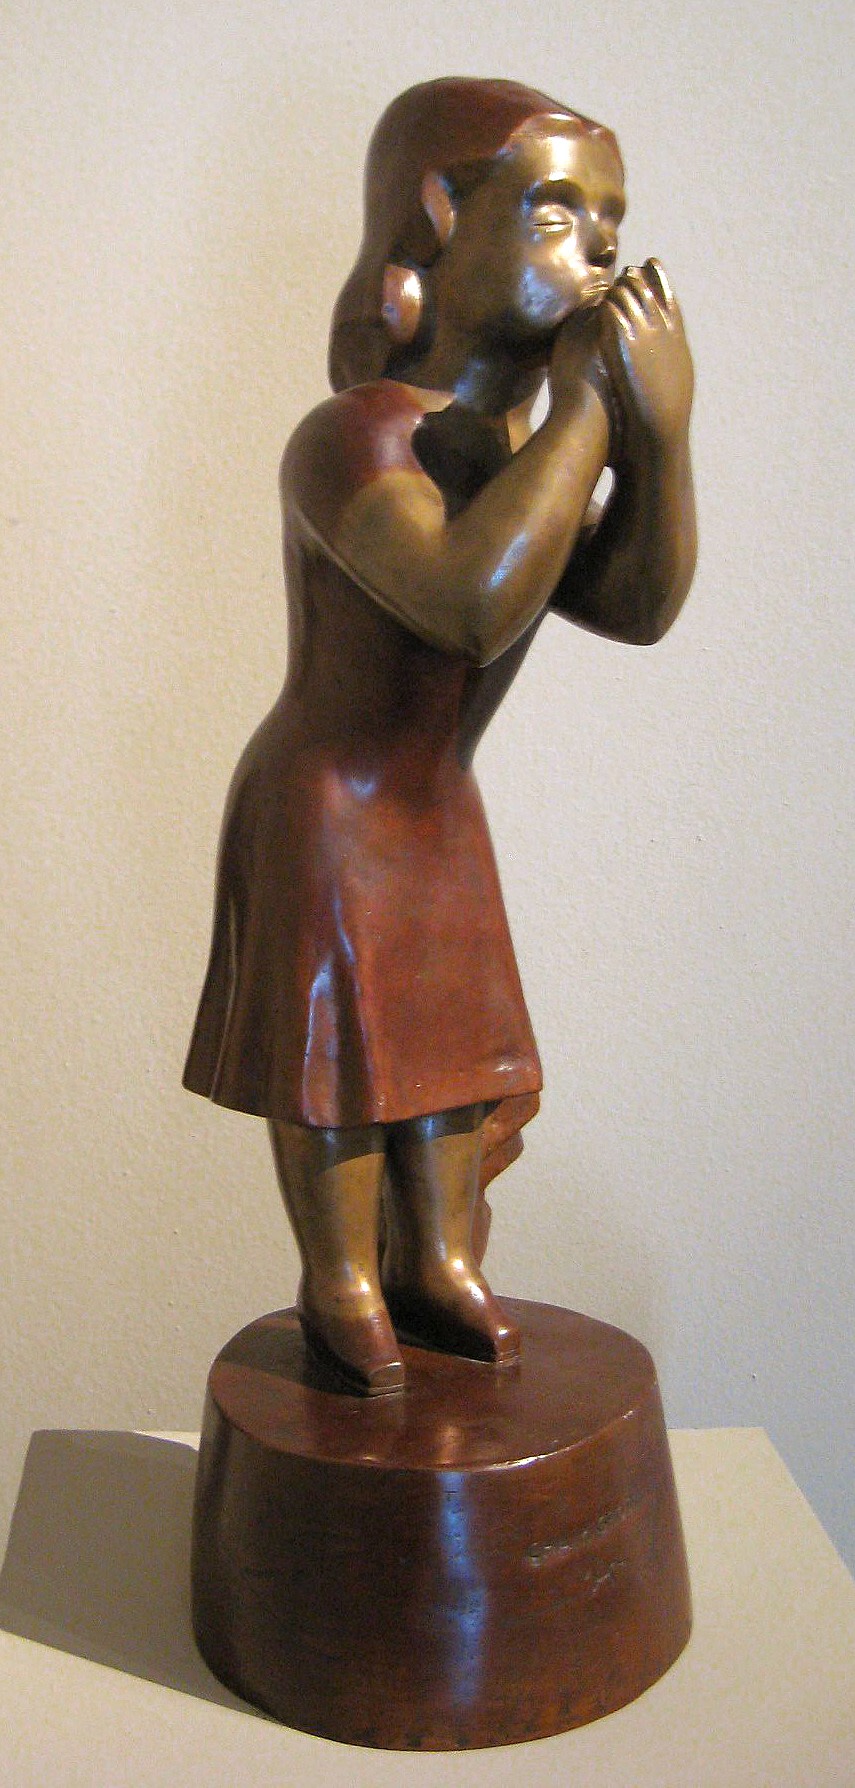 Chaim Gross, Make Up, 1927, bronze, 23 inches high, Edition 1/6